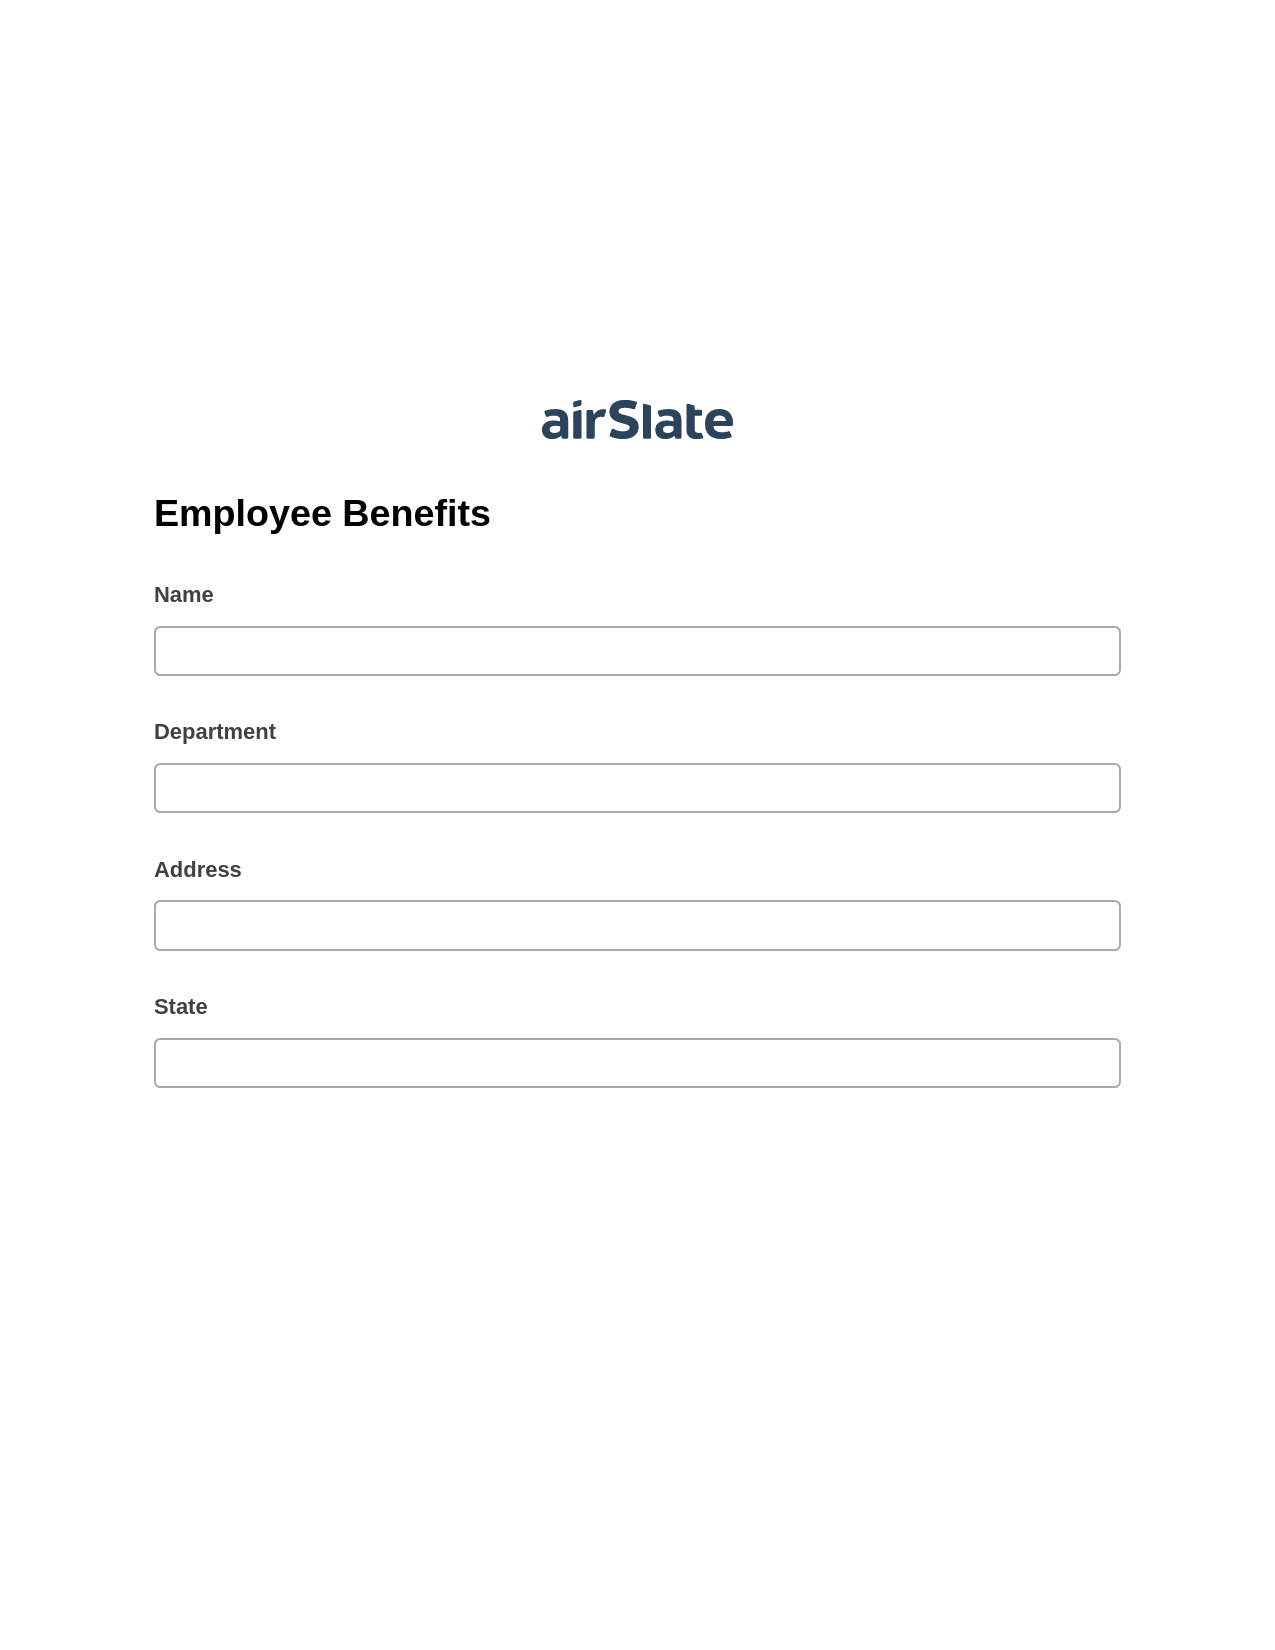 Multirole Employee Benefits Pre-fill from NetSuite Records Bot, Update NetSuite Records Bot, Export to NetSuite Record Bot